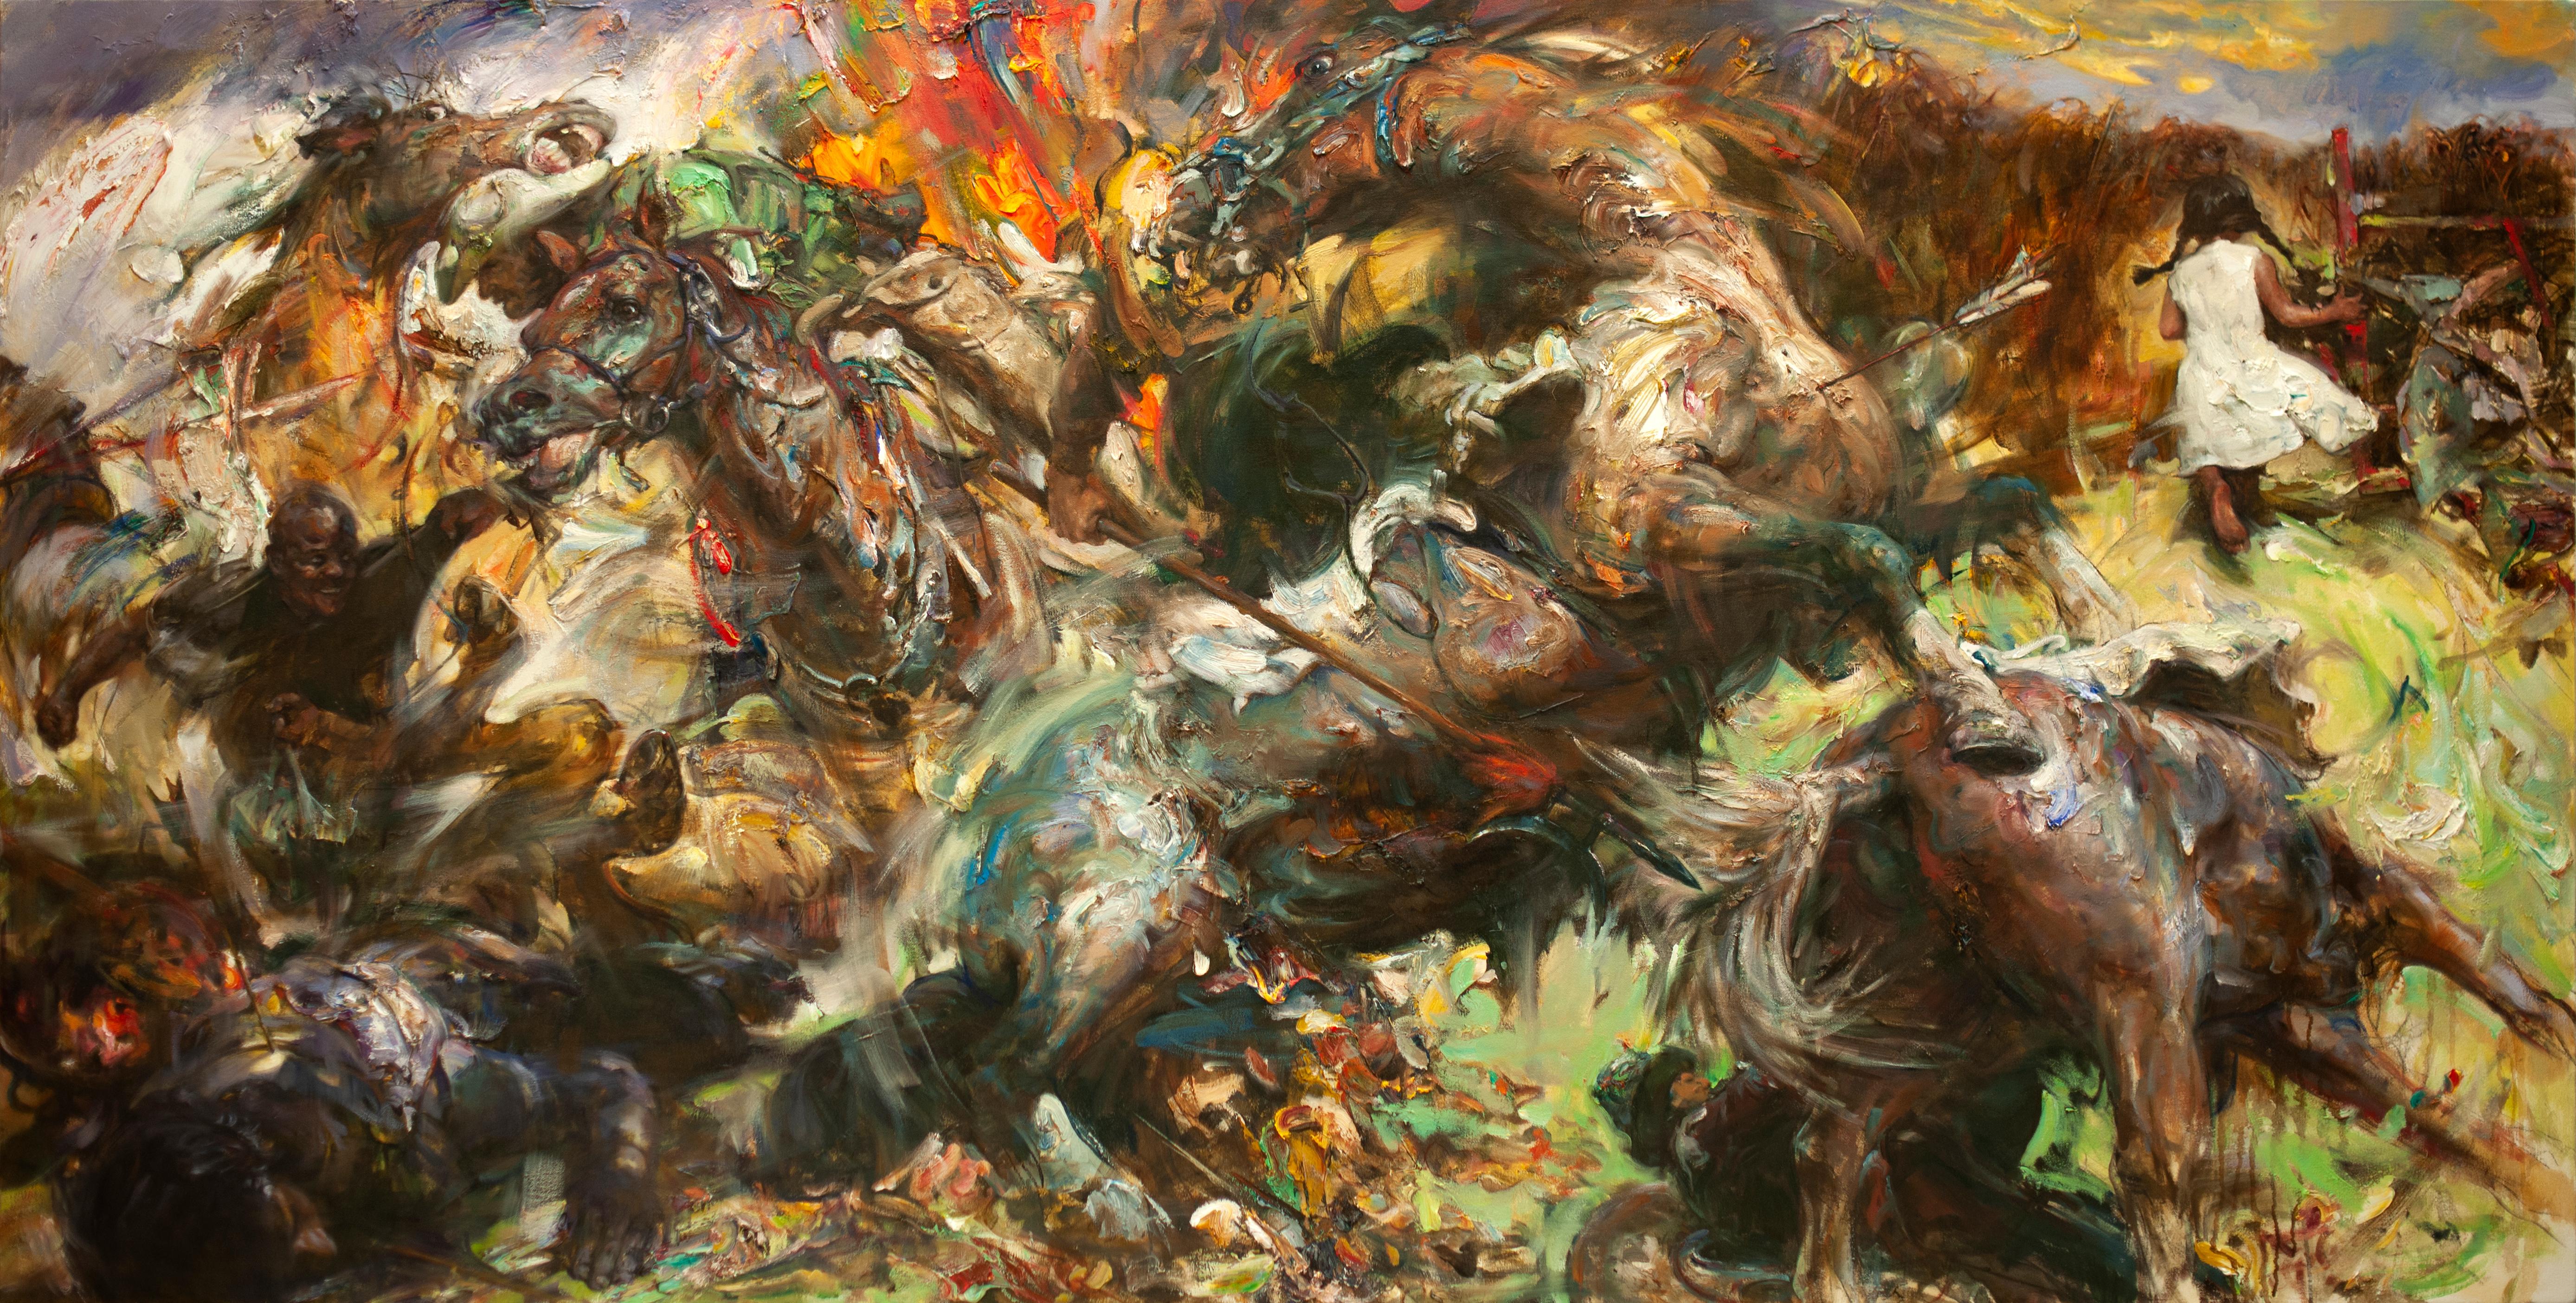 "The Battle", Contemporary, Oil Painting, on Canvas, Figurative, Textural